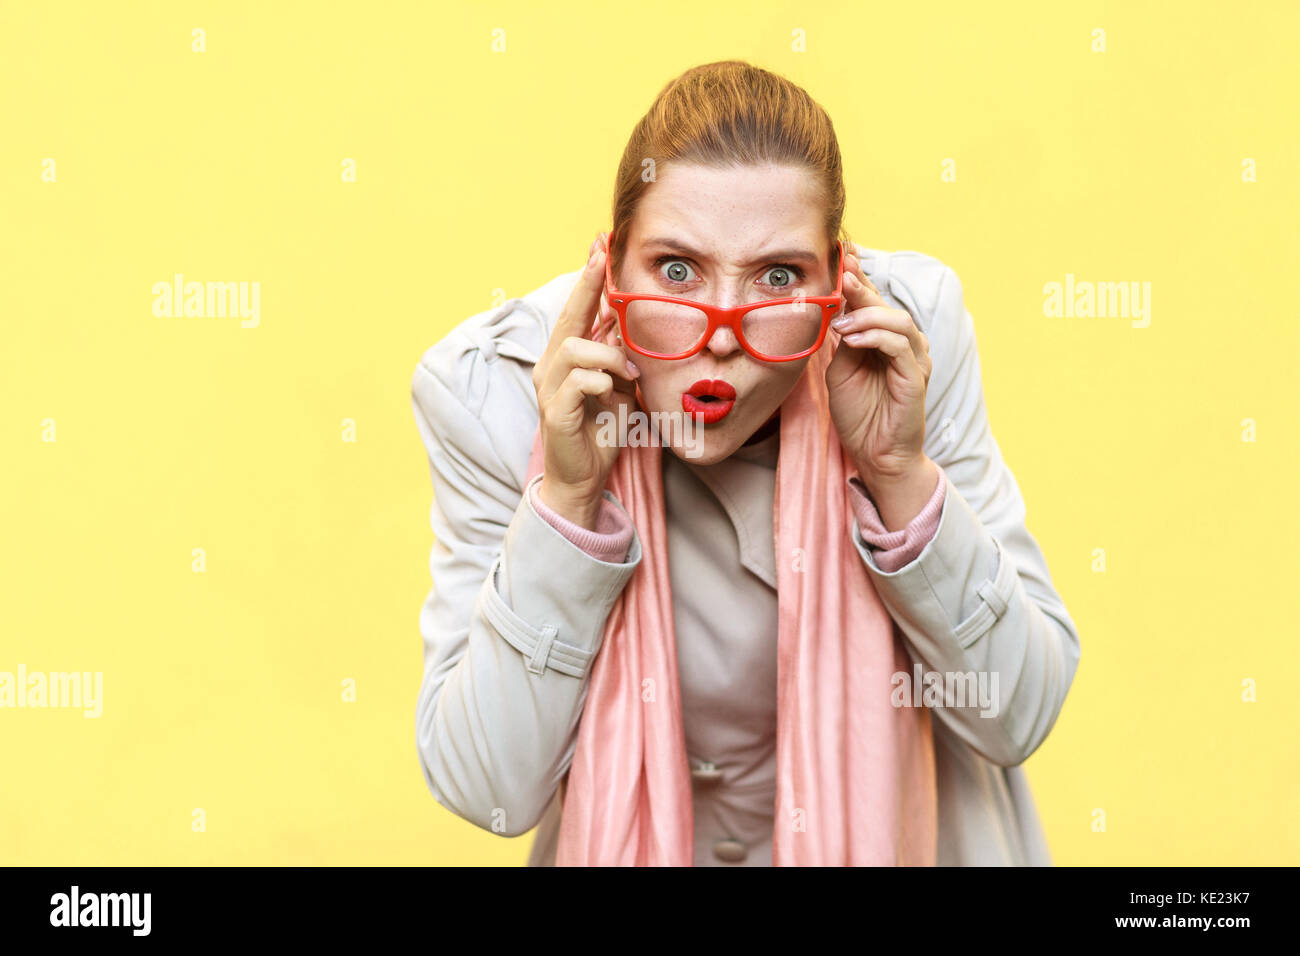 Redhead woman wearing coat, opening mouths widely, having surprised shocked looks.  Studio shot, isolated on yellow wall Stock Photo